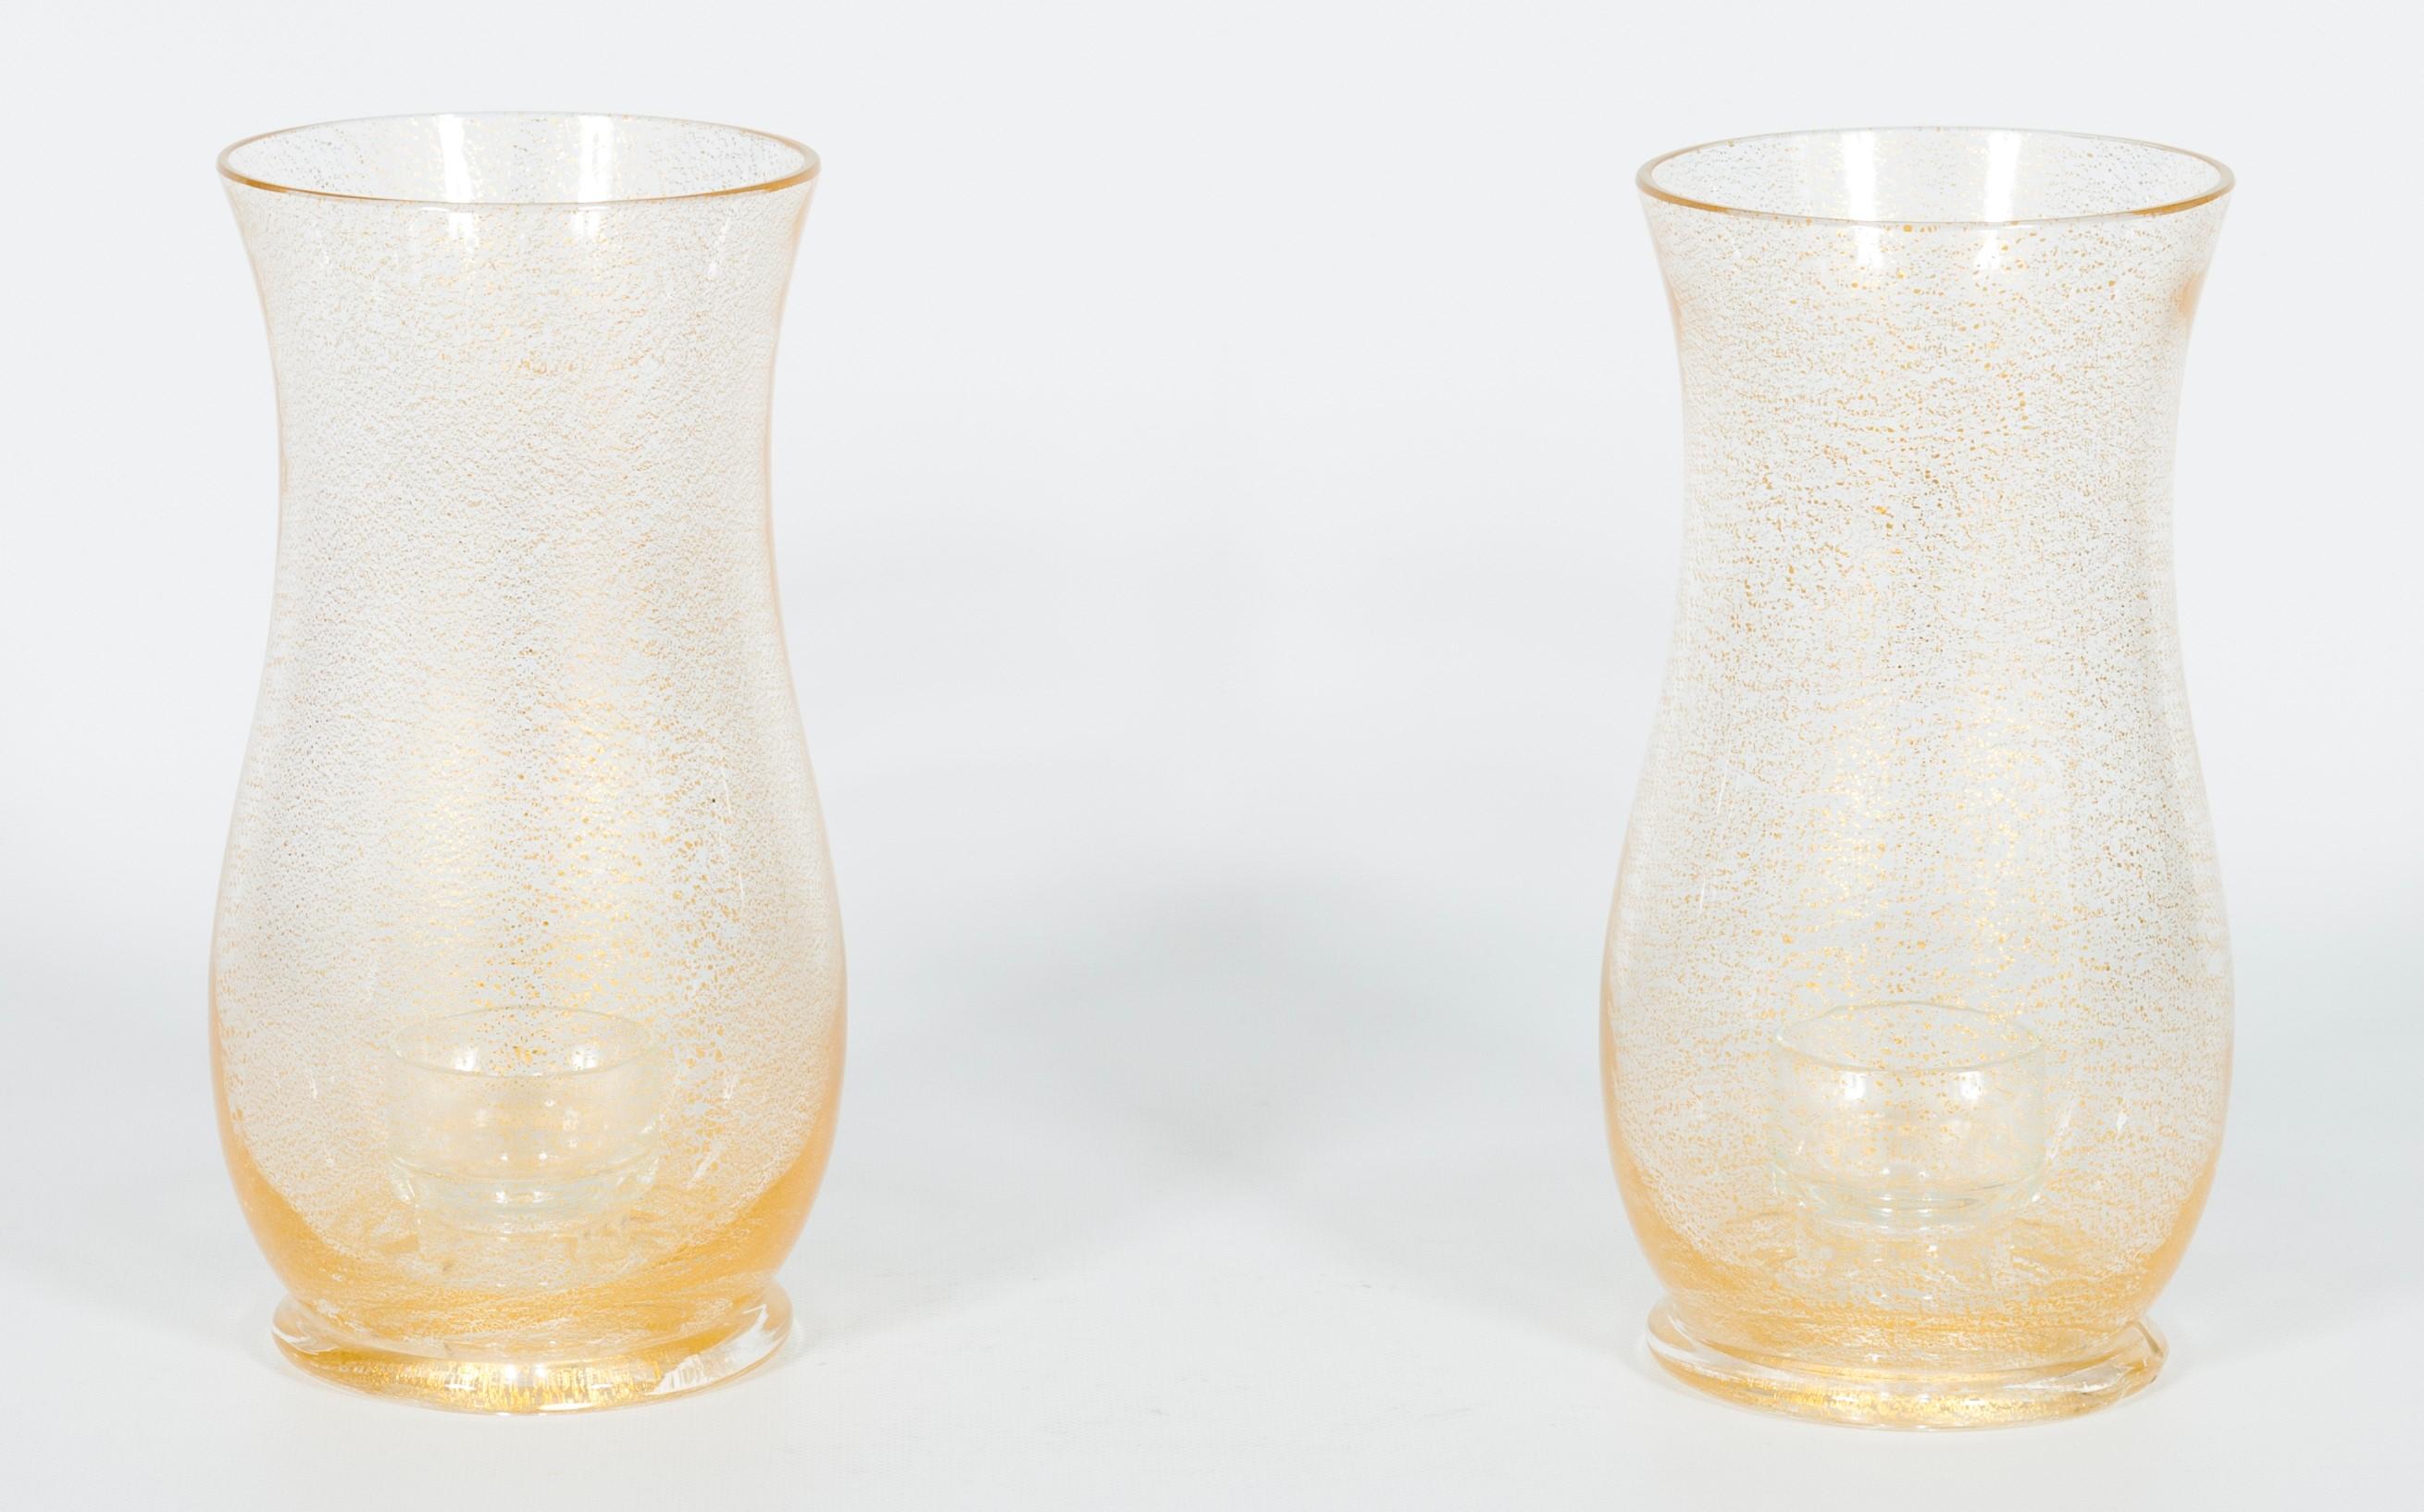 Pair of Murano glass candle holders with submerged gold, attributed to Striulli.
This unique set of two candle holders will bring beauty and elegance into your home. Entirely handcrafted in the 1980s in the Italian island of murano with transparent